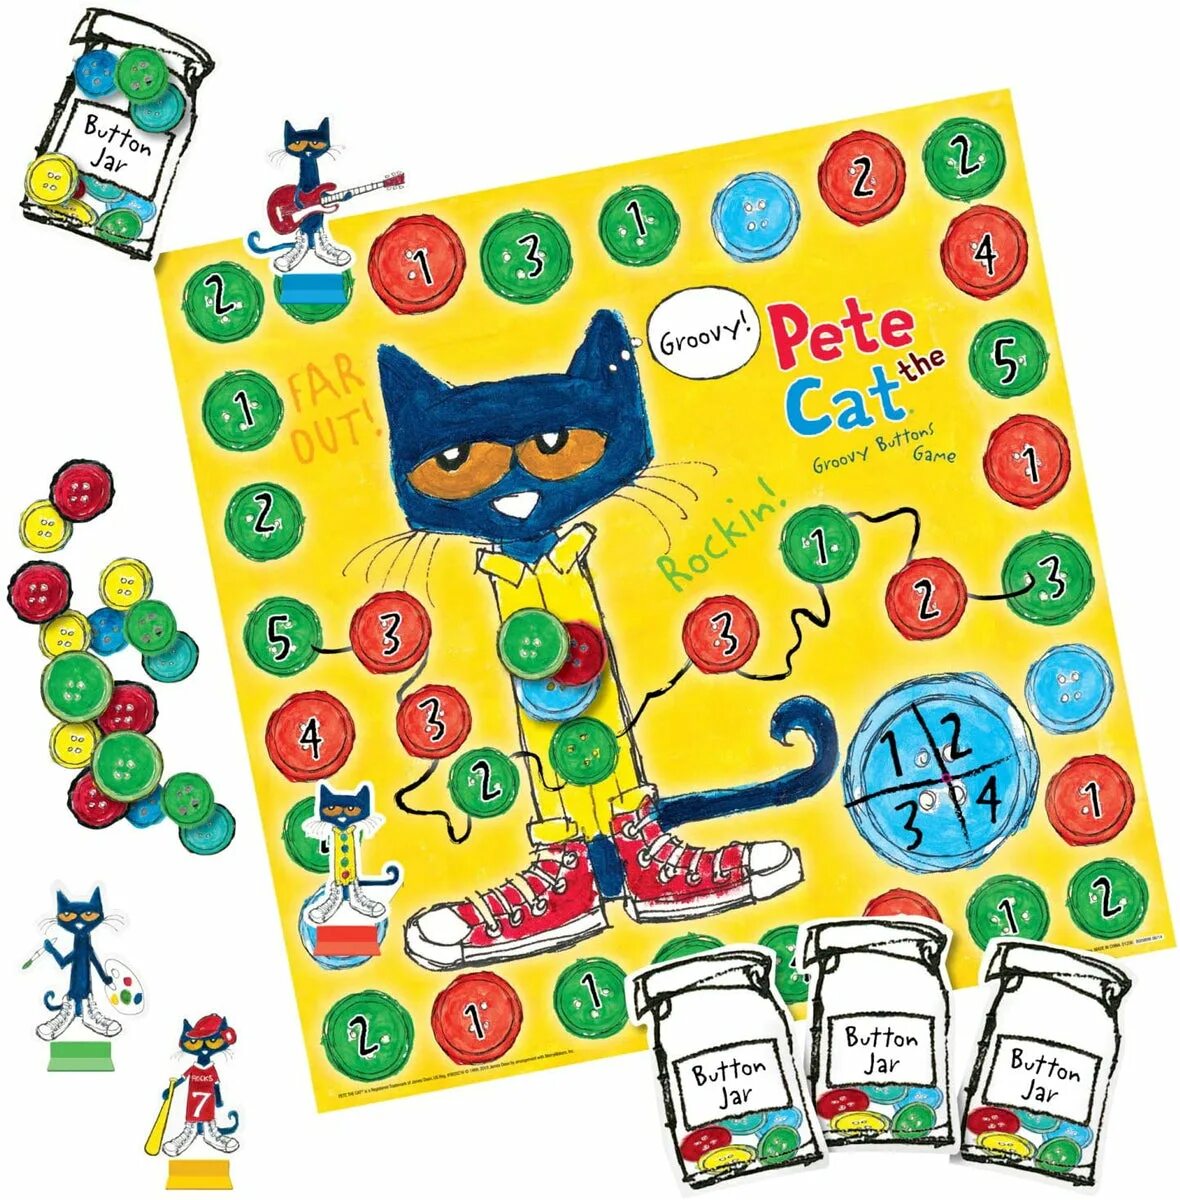 Pete the Cat Groovy buttons game. Настольная игра кошки. Pete the Cat and his four Groovy buttons. Живые кошки настольные игры. Настольная игра cats